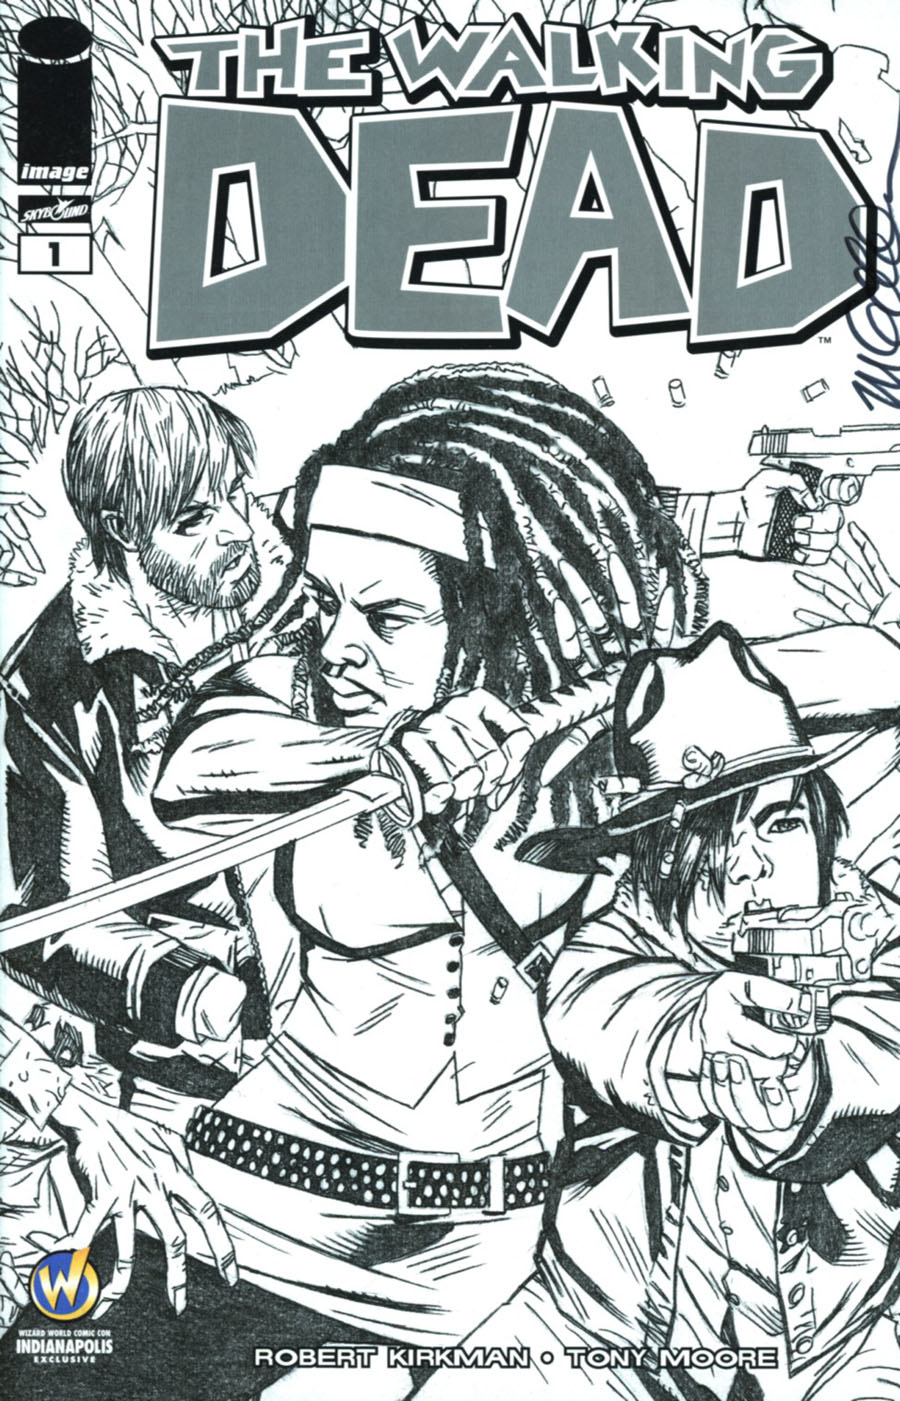 Walking Dead #1 Cover W Wizard World Comic Con Indianapolis VIP Exclusive Michael Golden Sketch Variant Cover Signed By Michael Golden